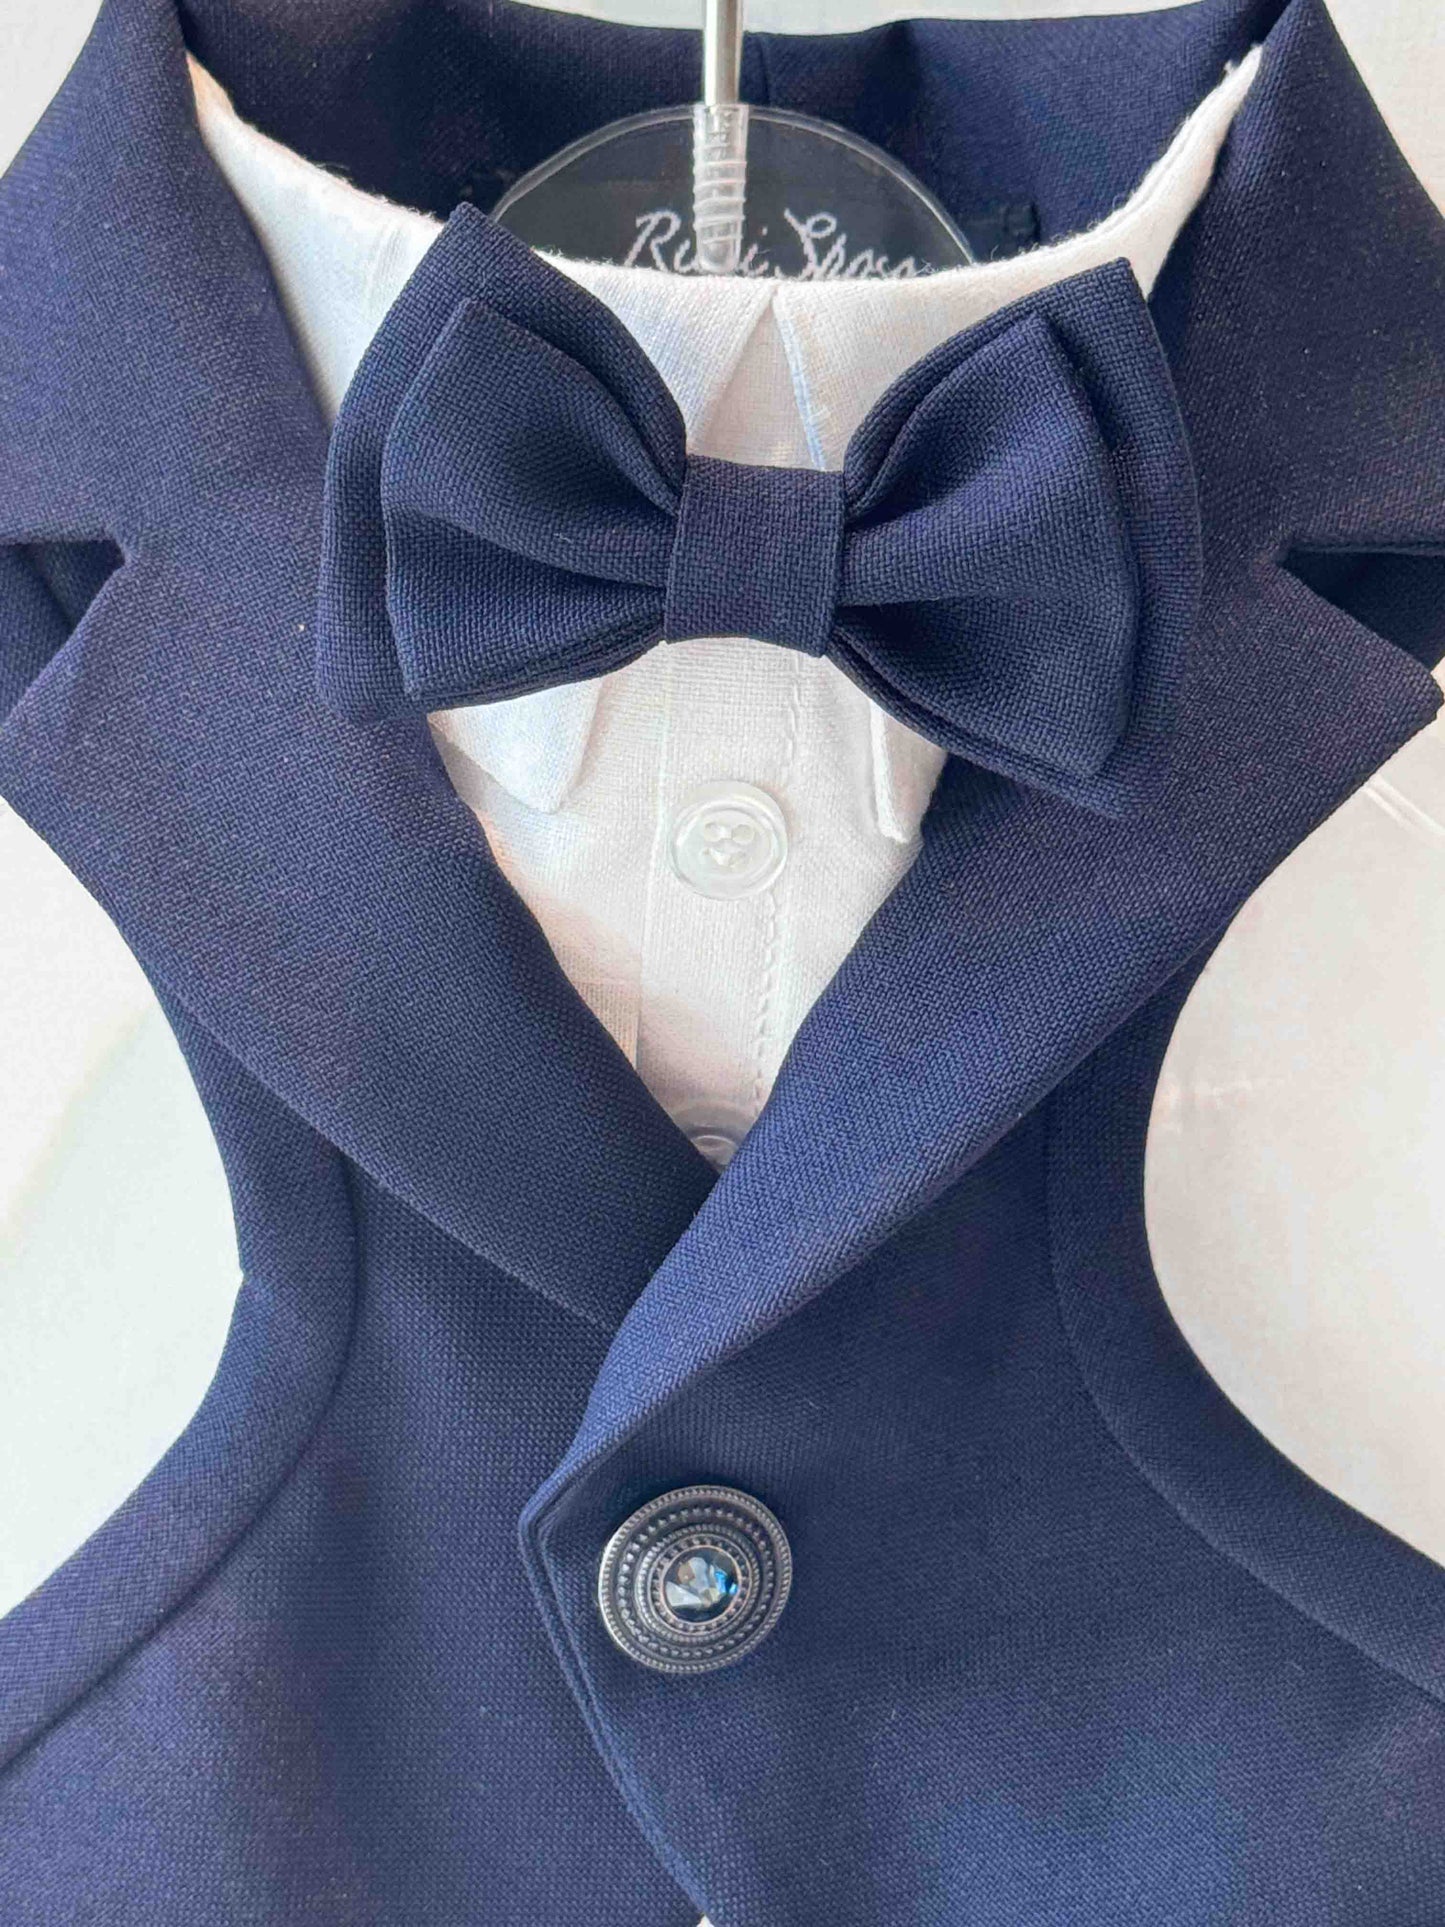 the details of our tuxedo for dogs, double bow tie, Italian shirt and jewel button